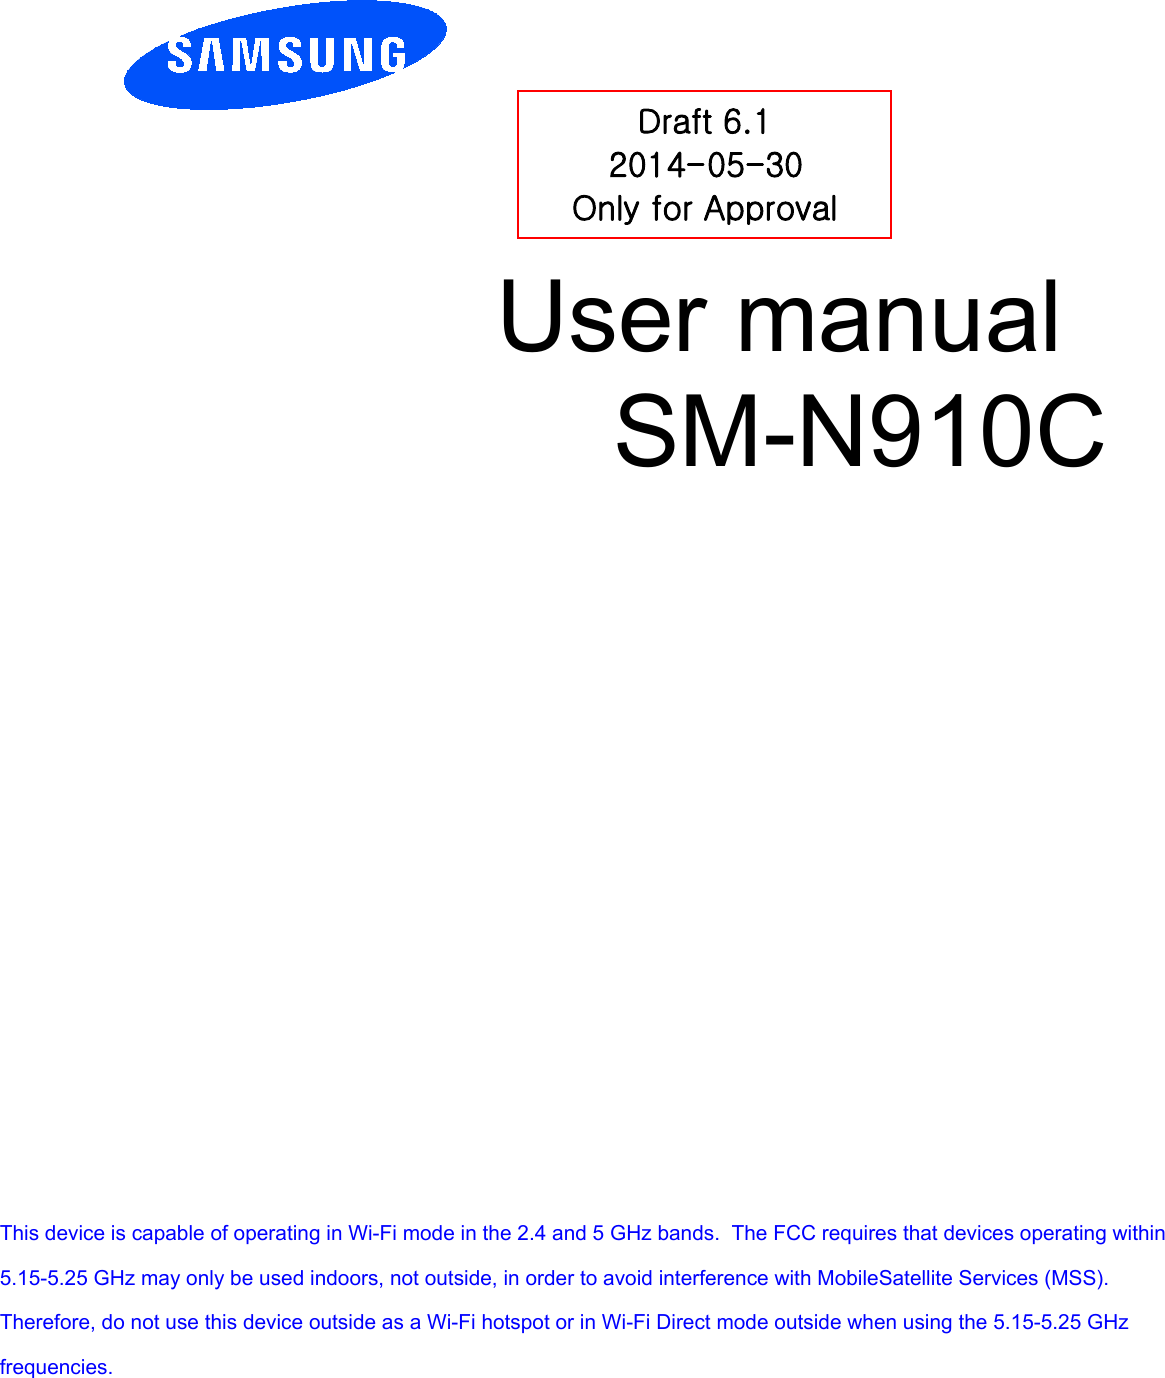          User manual  SM-N910C         Draft 6.1 2014-05-30 Only for Approval This device is capable of operating in Wi-Fi mode in the 2.4 and 5 GHz bands.  The FCC requires that devices operating within 5.15-5.25 GHz may only be used indoors, not outside, in order to avoid interference with MobileSatellite Services (MSS).   Therefore, do not use this device outside as a Wi-Fi hotspot or in Wi-Fi Direct mode outside when using the 5.15-5.25 GHz frequencies. 